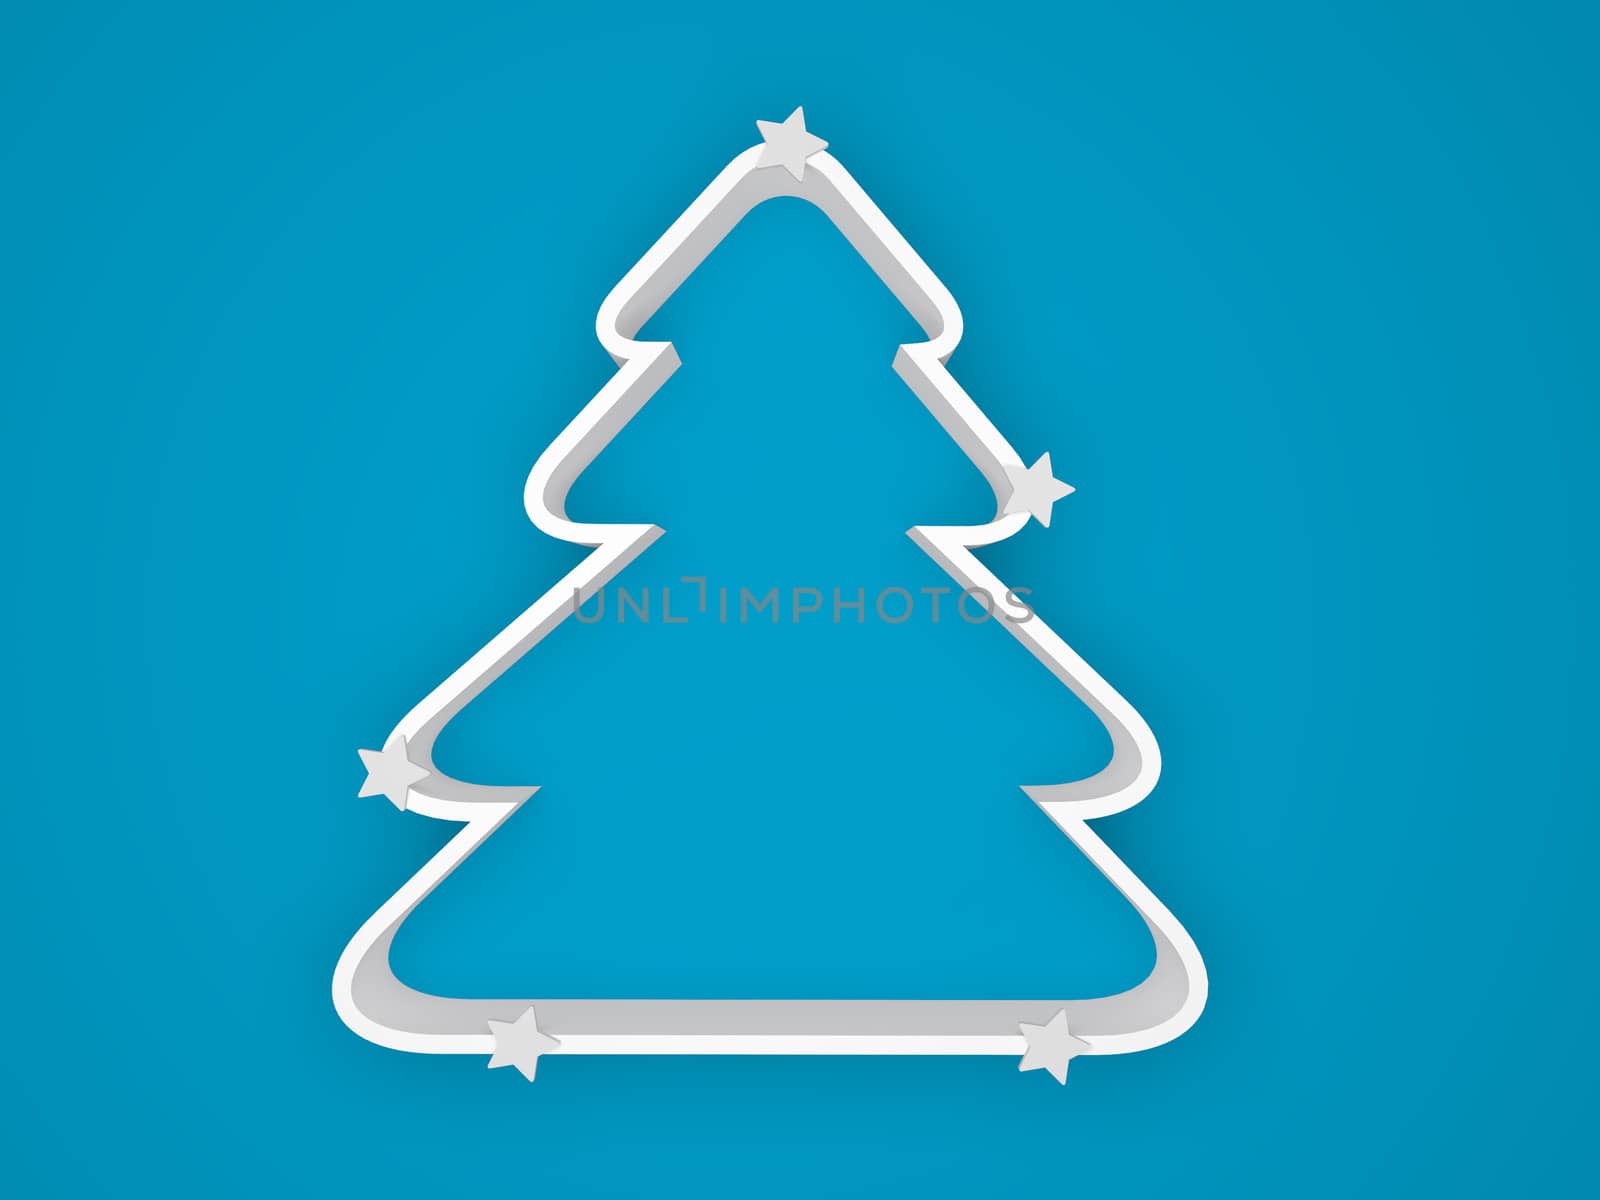 white Christmas tree outline for party invitations or greetings